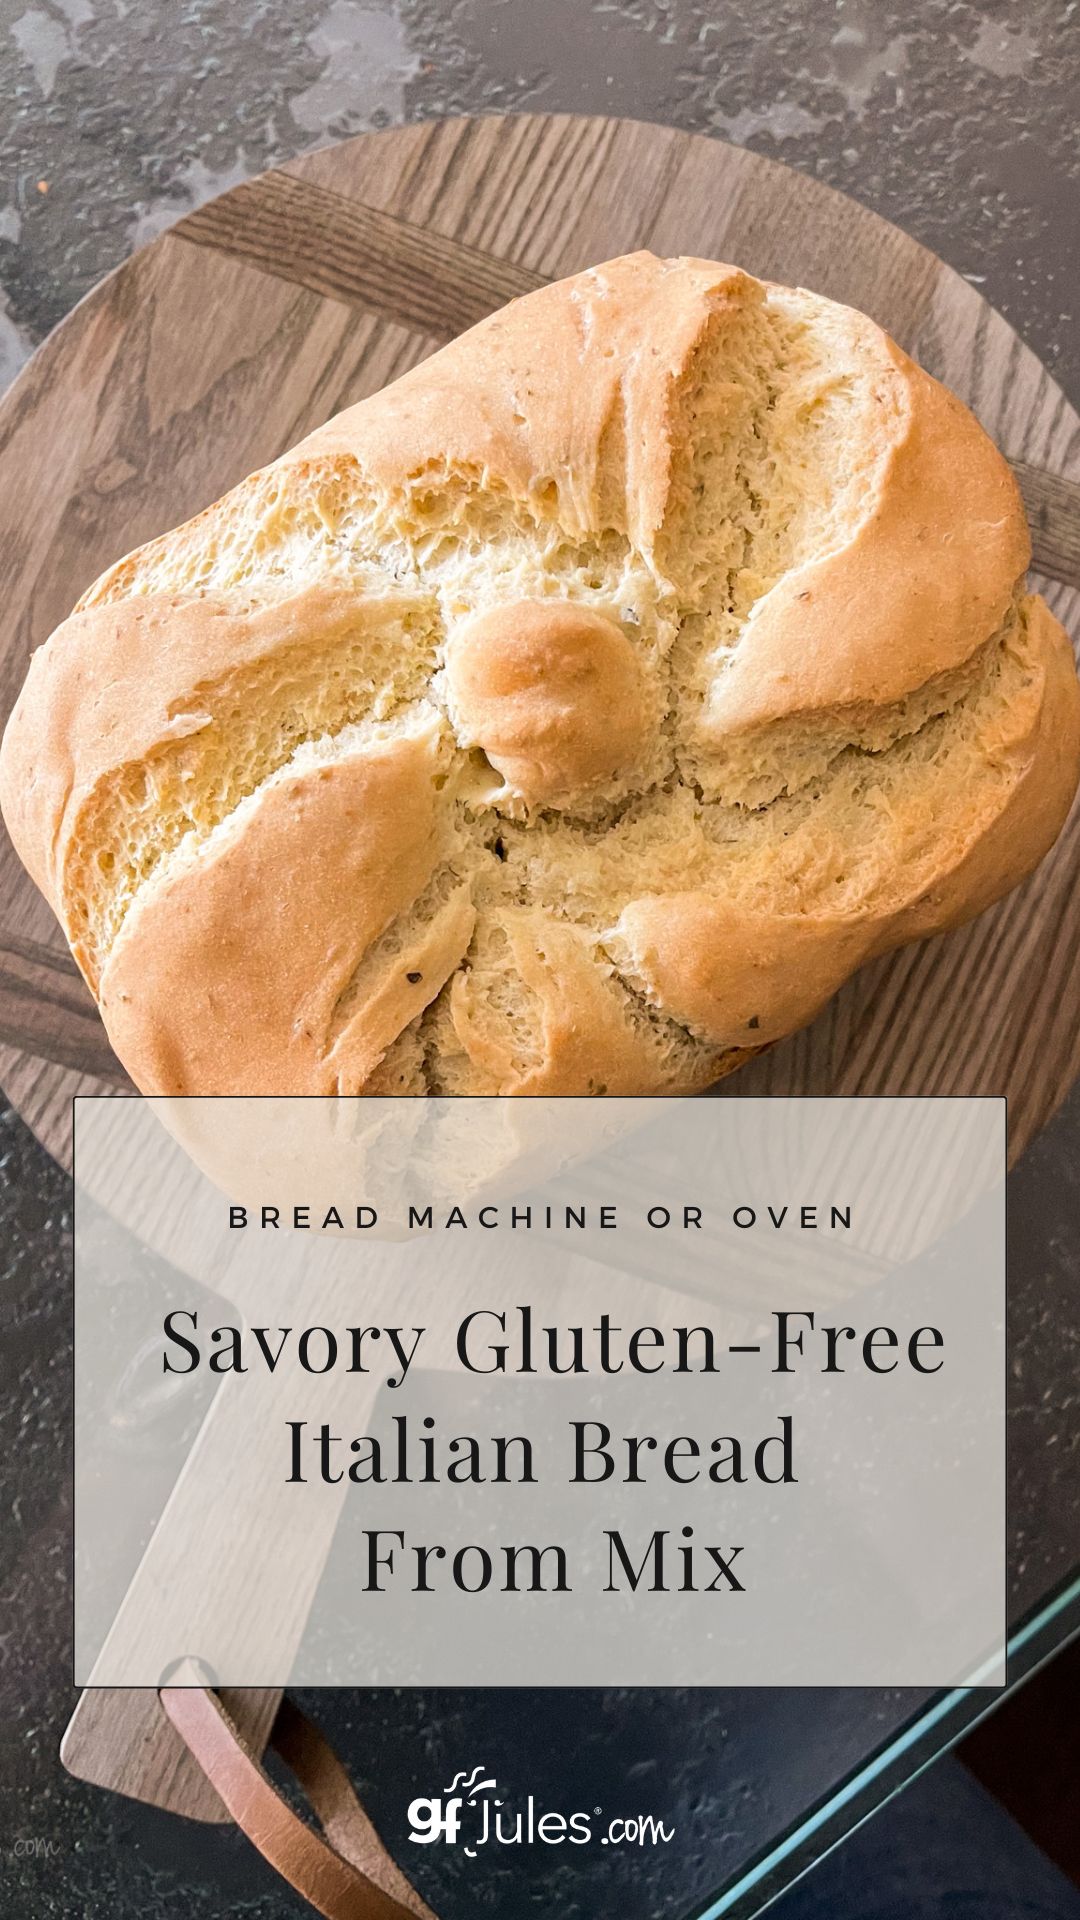 Savory Gluten Free Italian Bread From Mix for bread machine or oven | gfJules